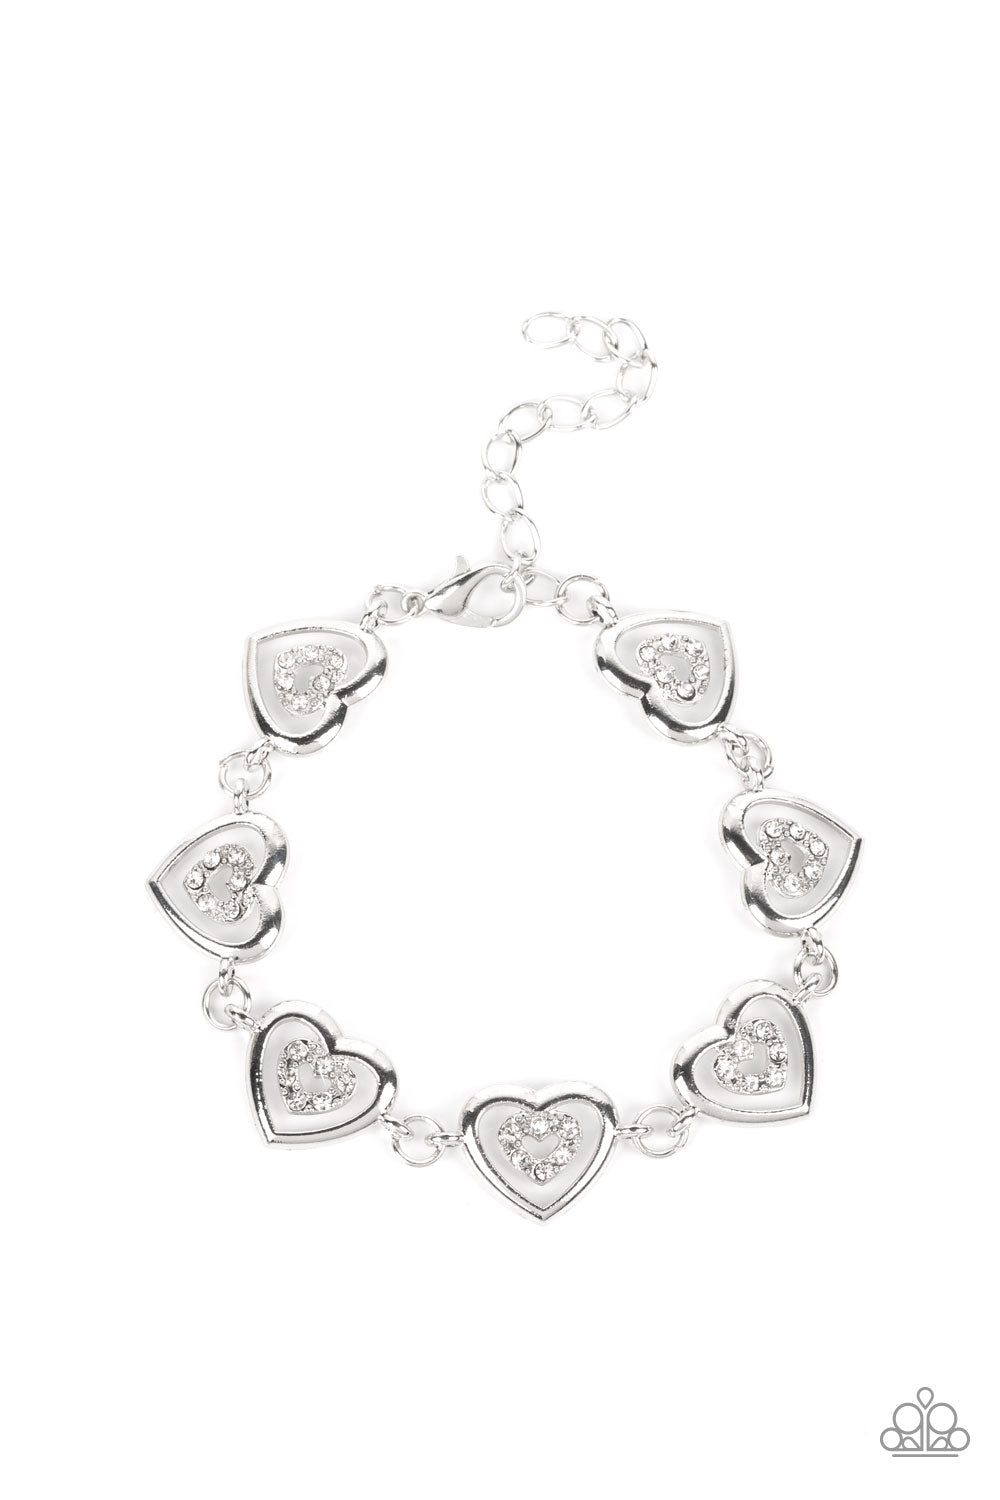 Catching Feelings White Heart Charm Bracelet - Paparazzi Accessories- lightbox - CarasShop.com - $5 Jewelry by Cara Jewels